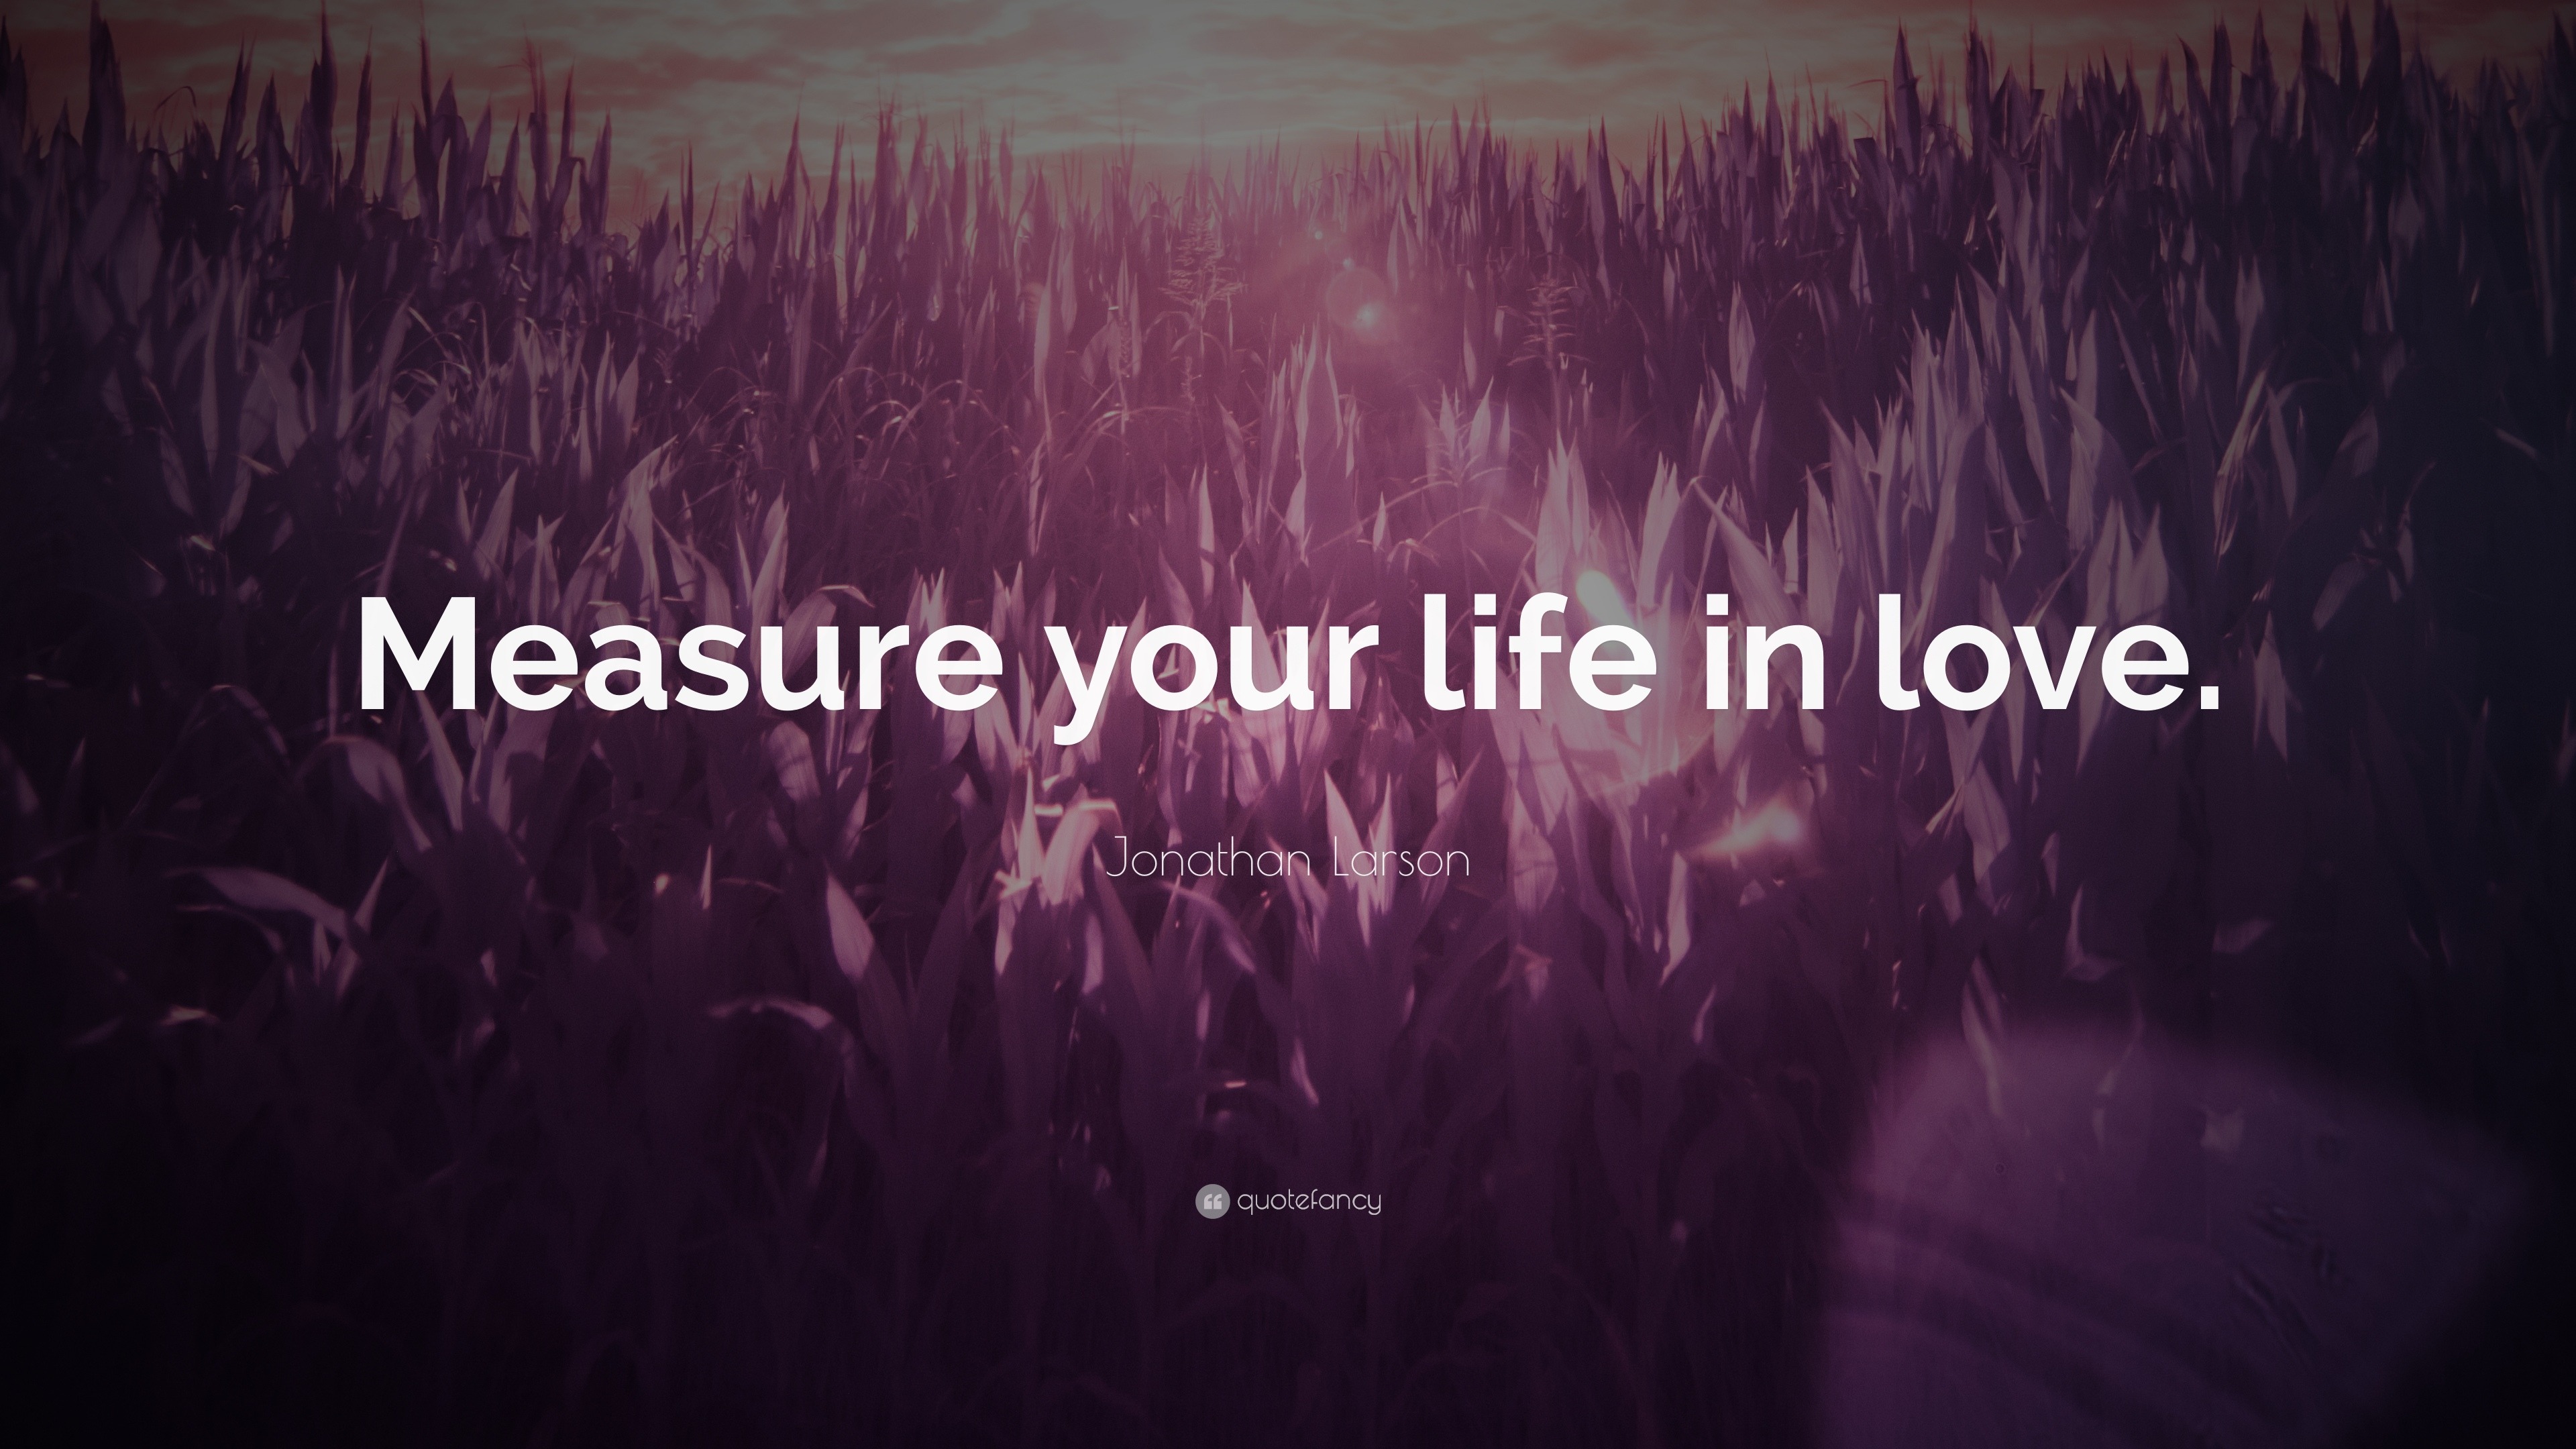 Jonathan Larson Quote “Measure your life in love ”